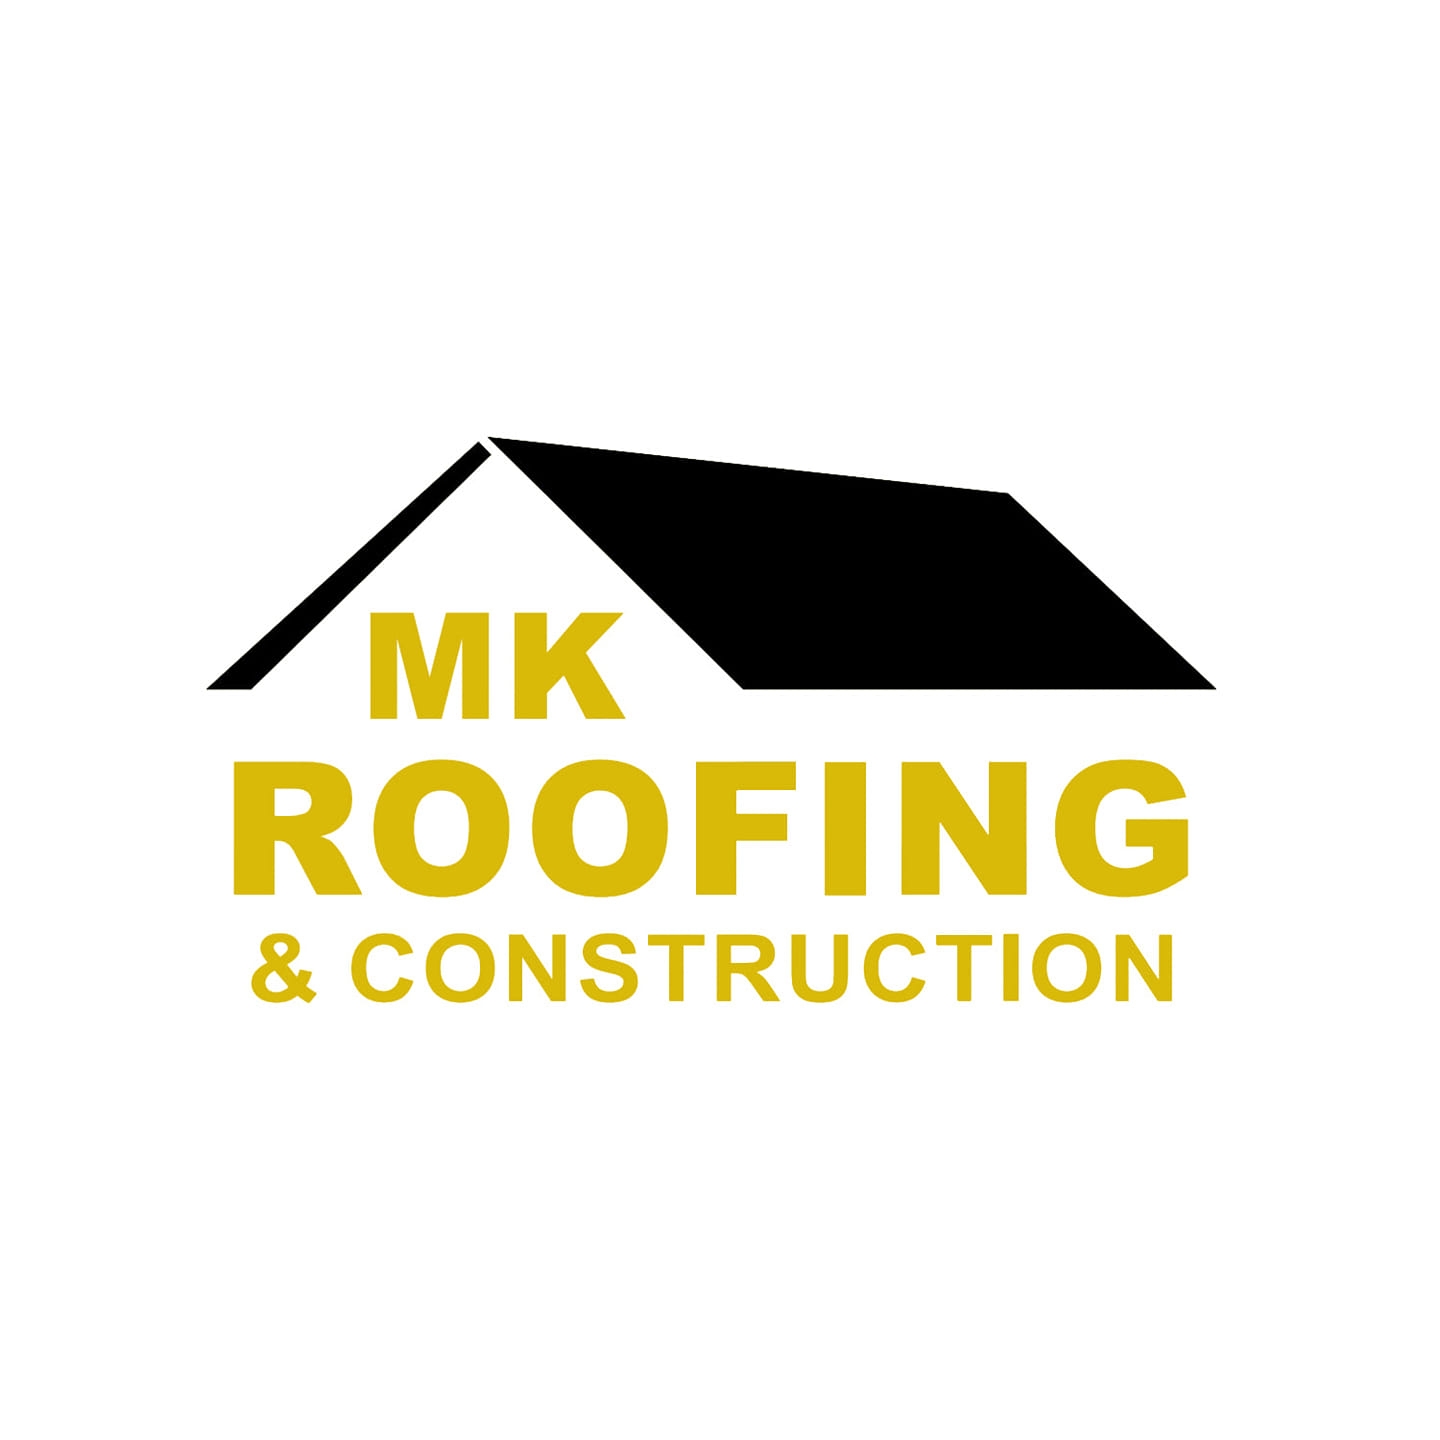 MK Roofing & Construction of Middlefield OH